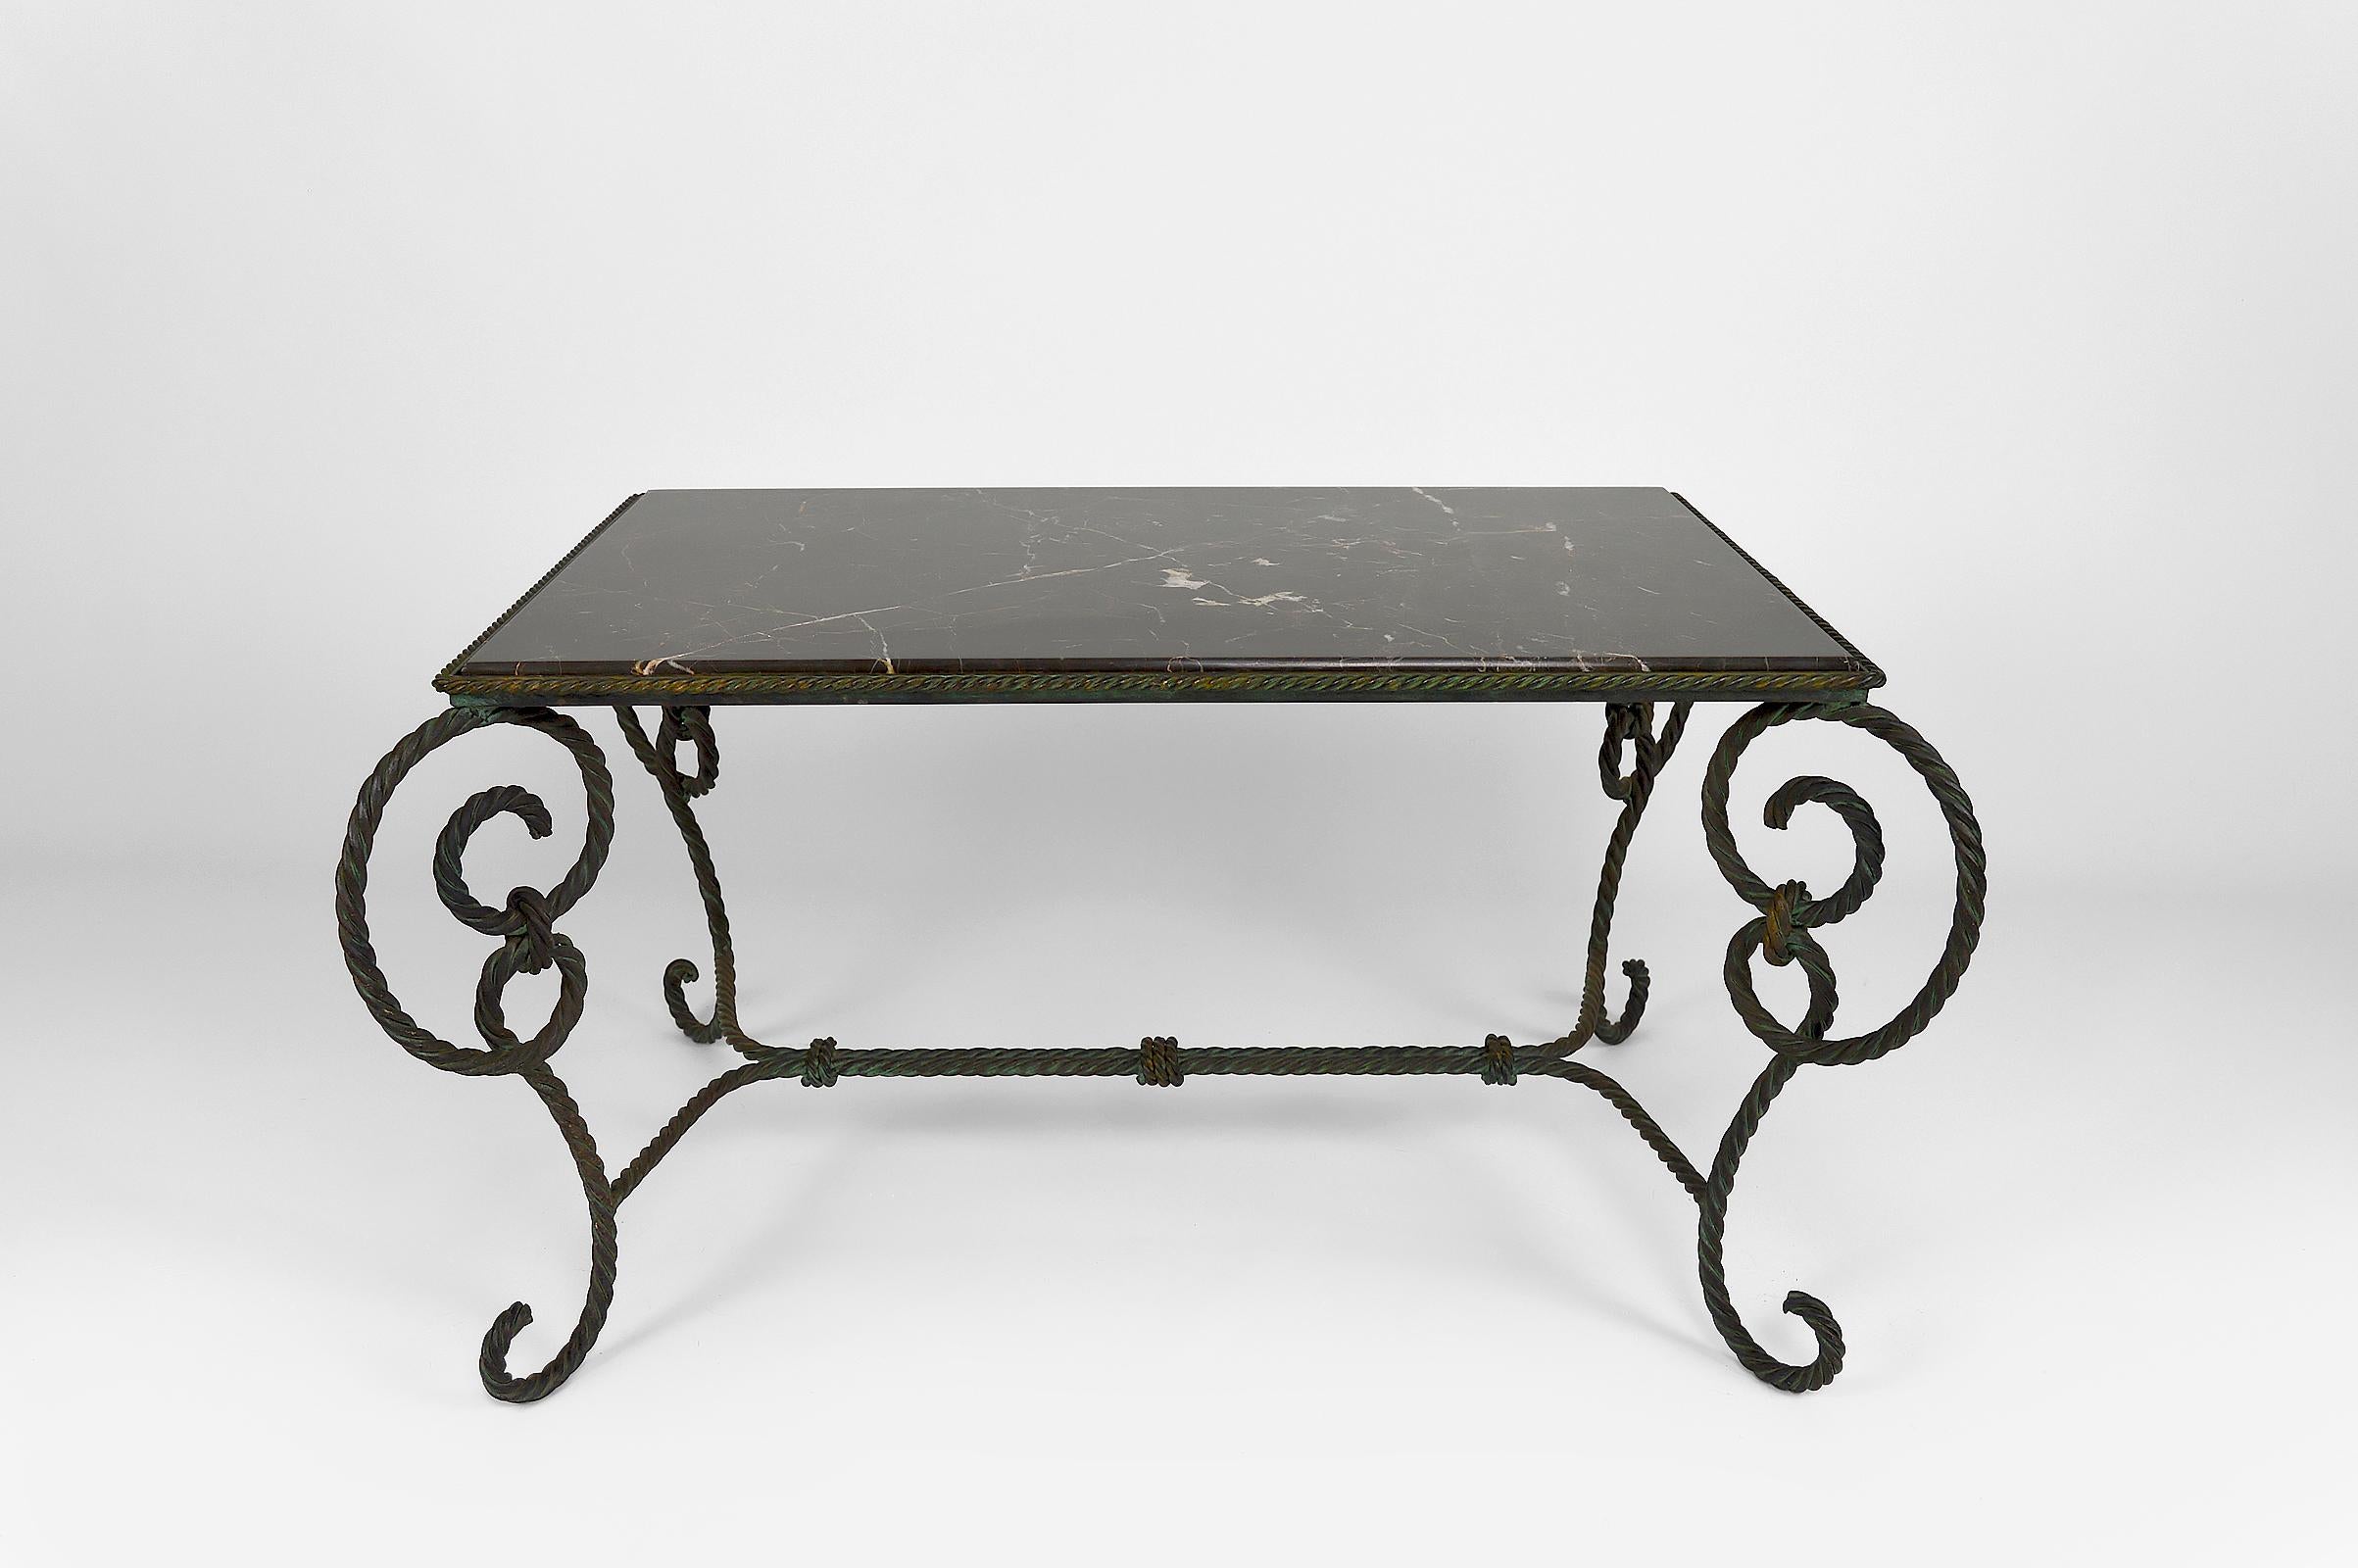 Mid-20th Century Rectangular Art Deco Coffee Table in Wrought Iron and Black Marble, France, 1940